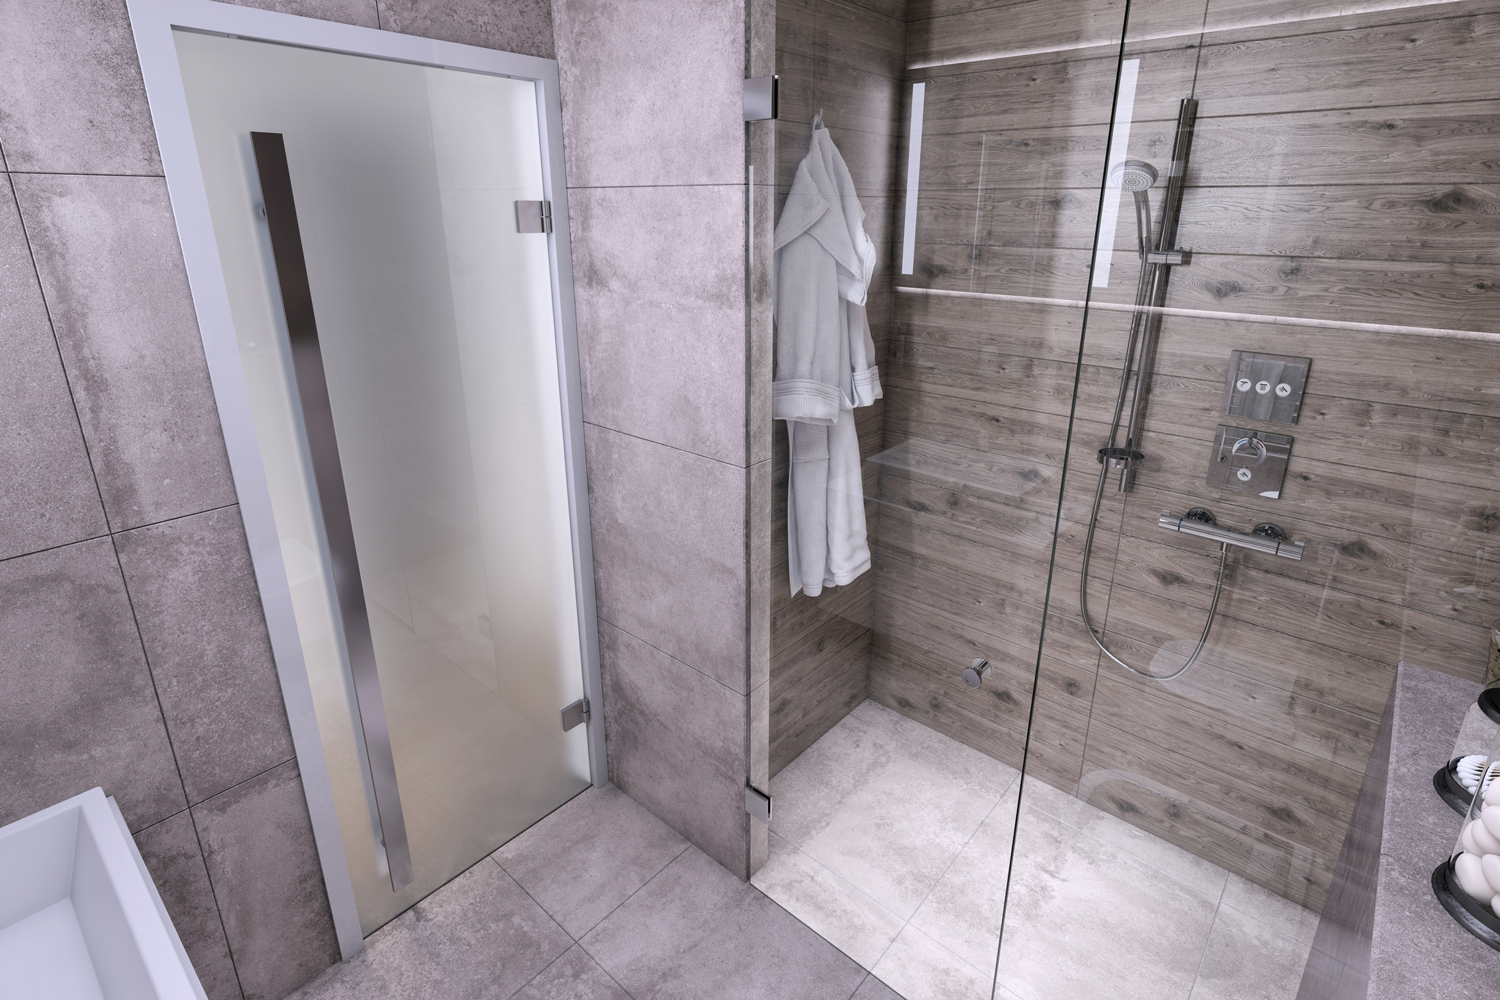 Small bathroom interior with sink and glass door shower with concrete textured walls and floor.